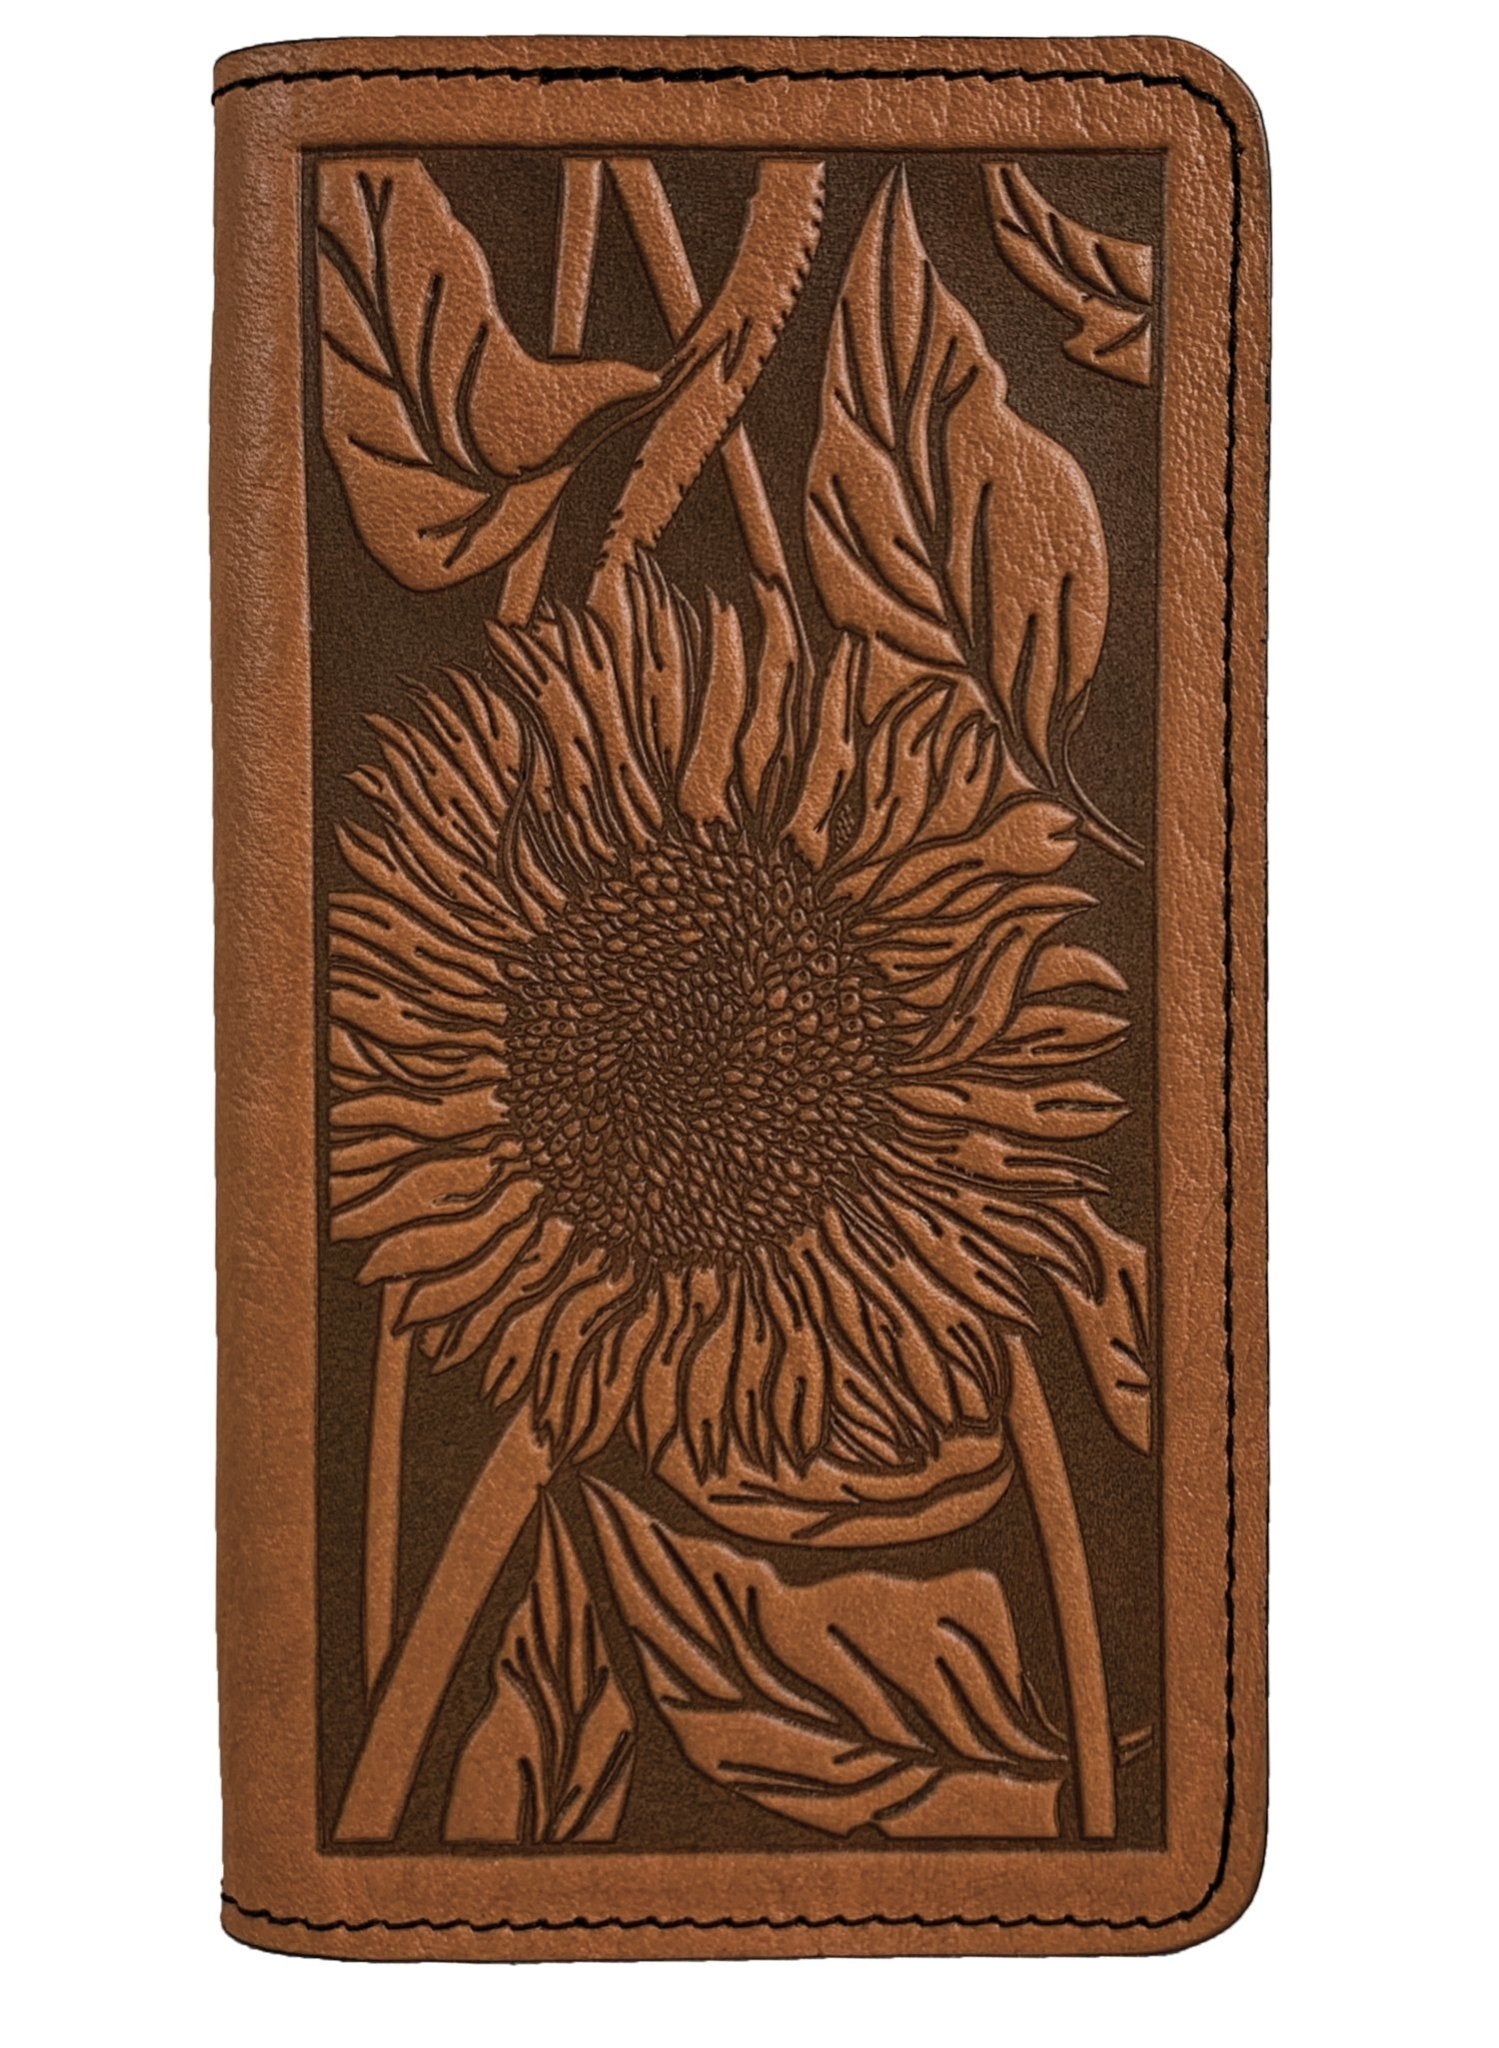 ecolemamie Small ecolemamie Small Leather Smartphone Wallet Case, Sunflower in Marigold